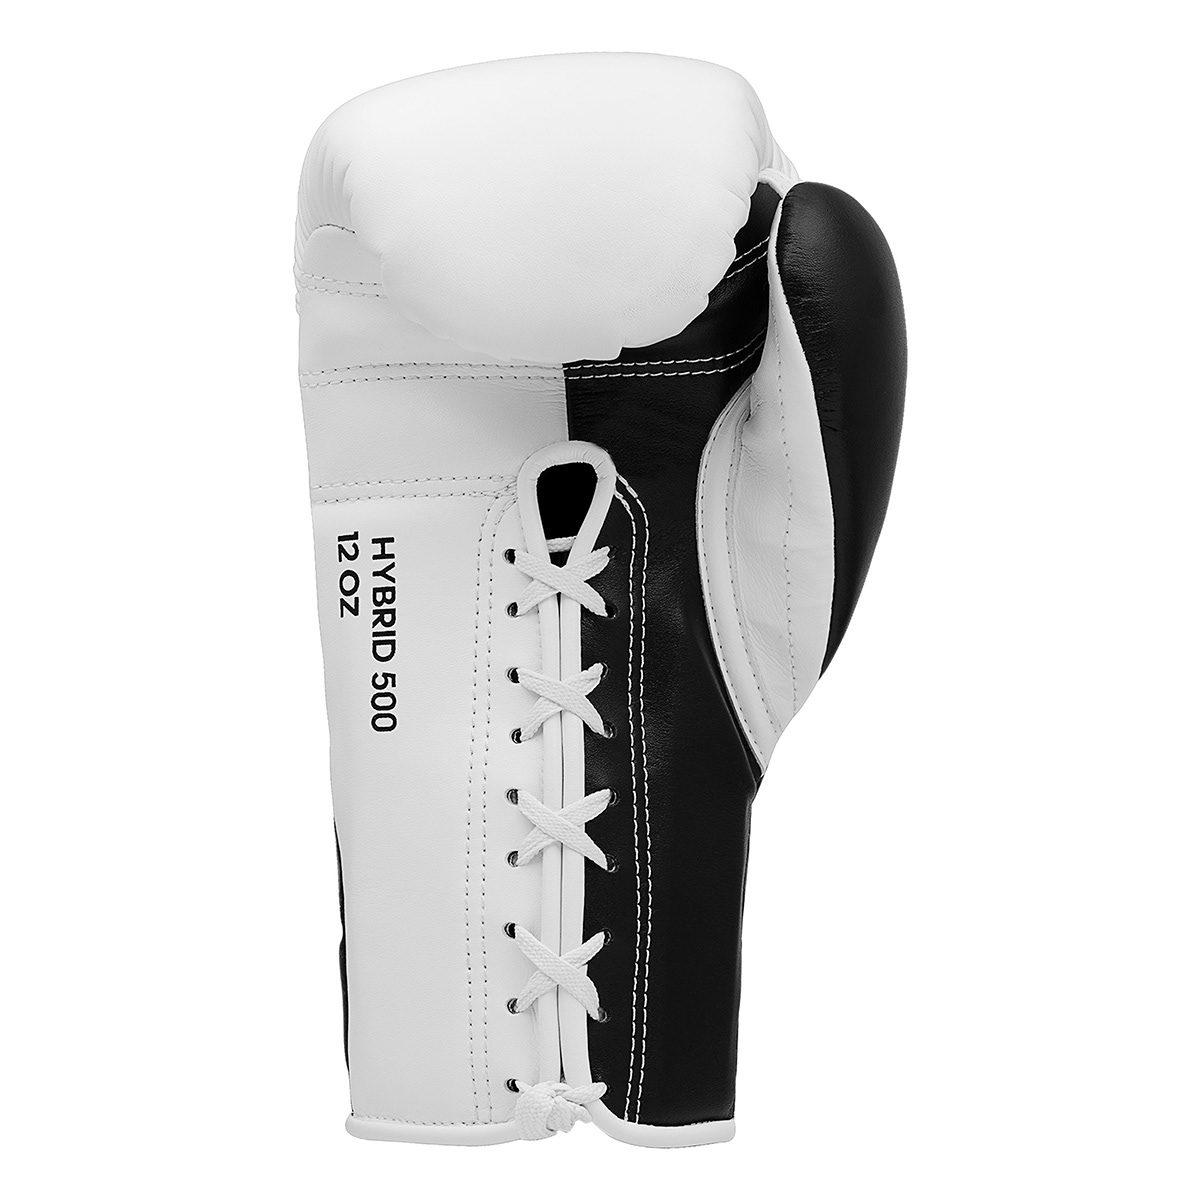 sporting goods Boxing gloves industrial design 